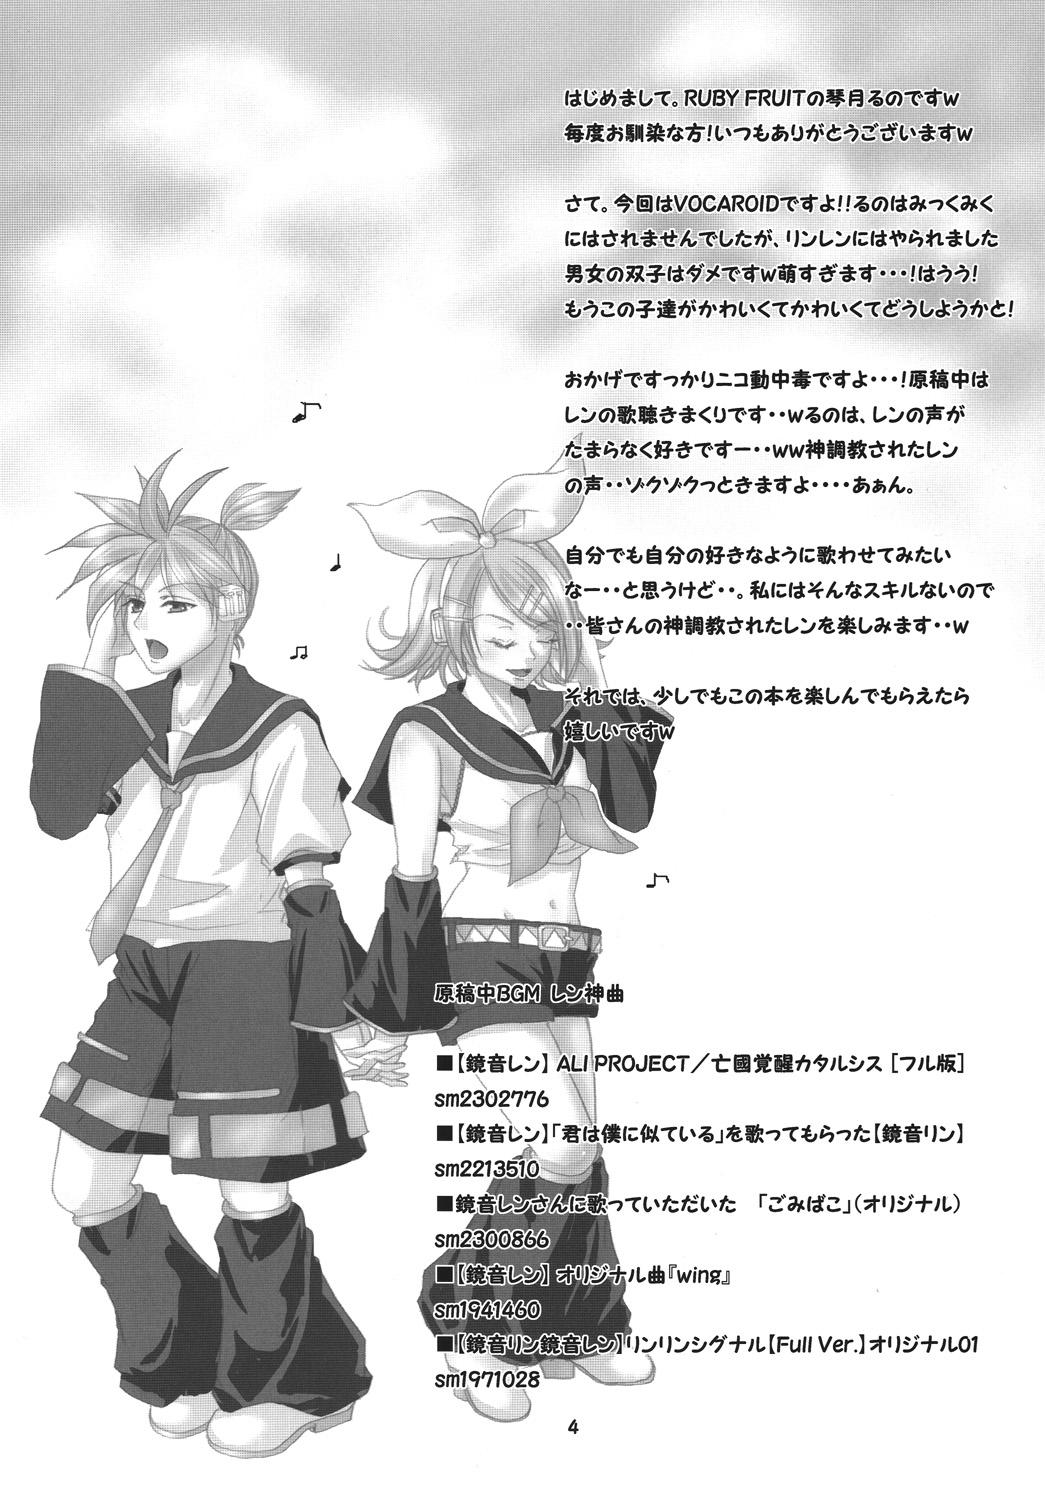 Caiu Na Net [RUBY FRUIT (Kotoduki Z)] R-Side/L-Side (Vocaloid) [Digital] - Vocaloid Guys - Picture 3